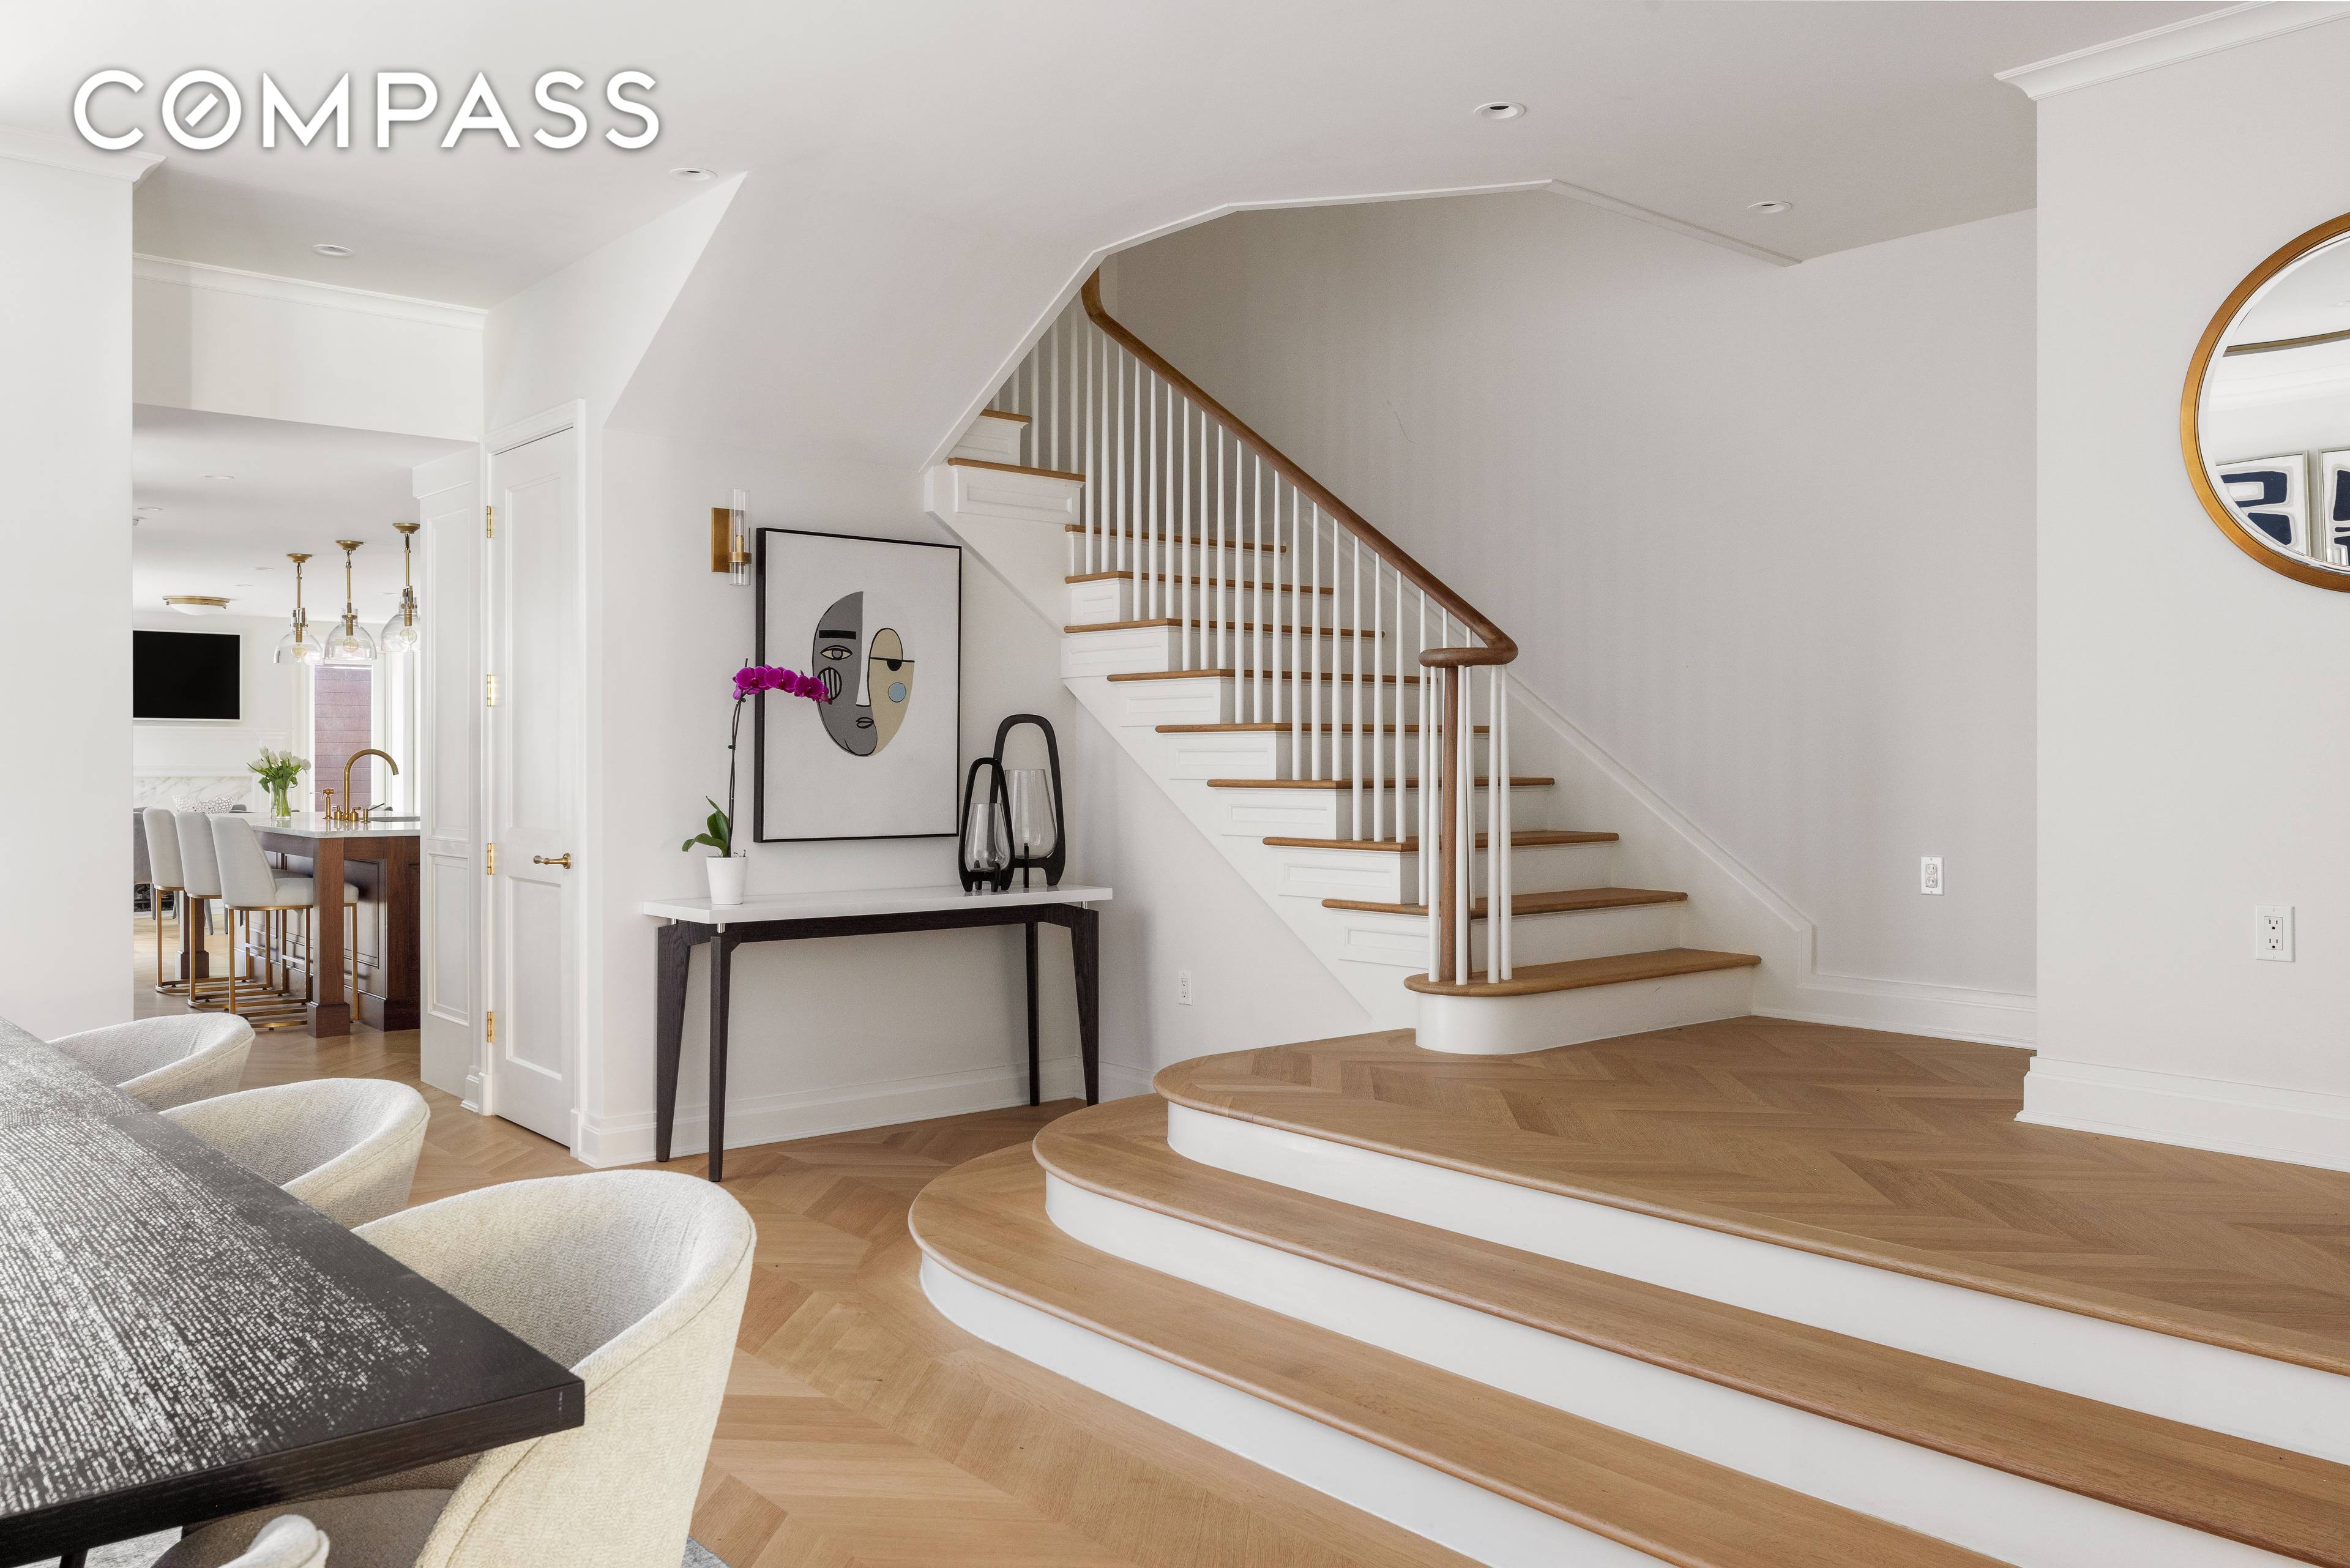 Imagine walking into a home completely reimagined and modernized with the latest technology and luxury amenities while maintaining the classic charm of a 150 year old townhouse.